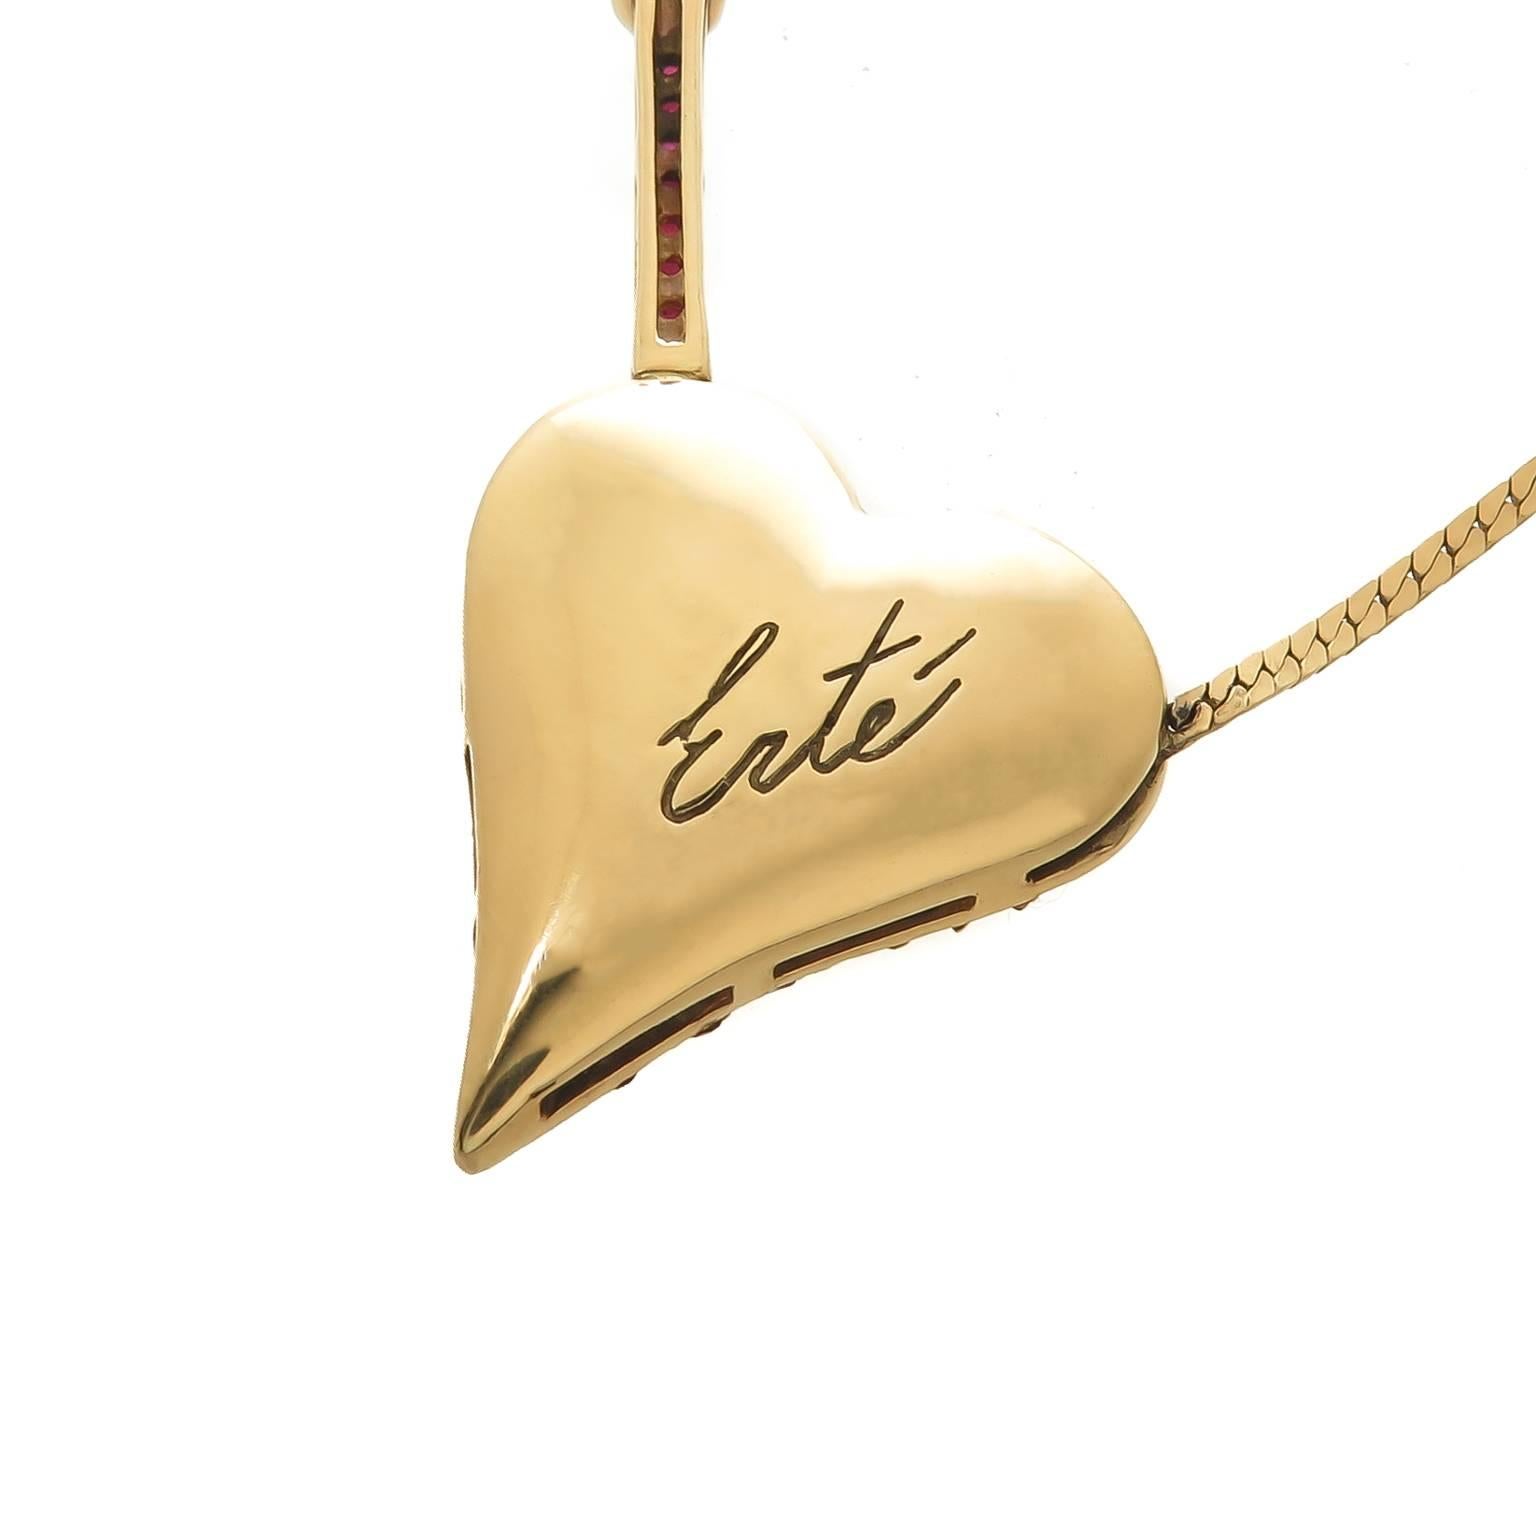 Circa 1980s Erte Beauty of the Beast 14K yellow Gold necklace. The heart measures 1 1/8 inch, 2 inch in length with the arrow. Set with Round Brilliant cut Diamonds and fine color Rubies. Suspended from an 18 1/2 inch chain. Signed and numbered and